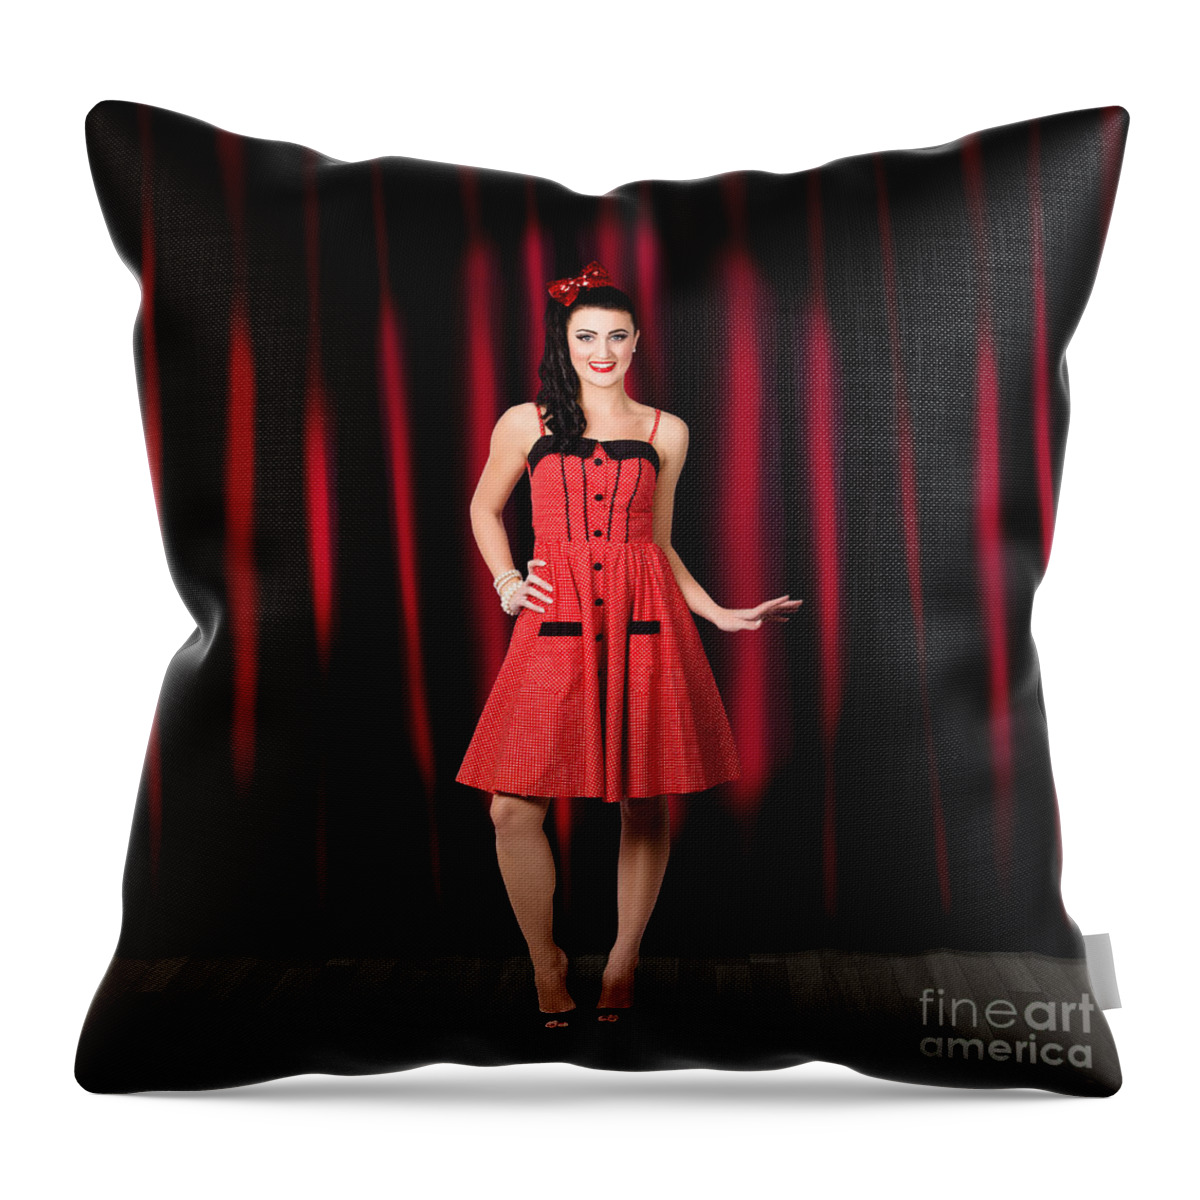 Stage Throw Pillow featuring the photograph Dancing woman wearing retro rockabilly dress #1 by Jorgo Photography